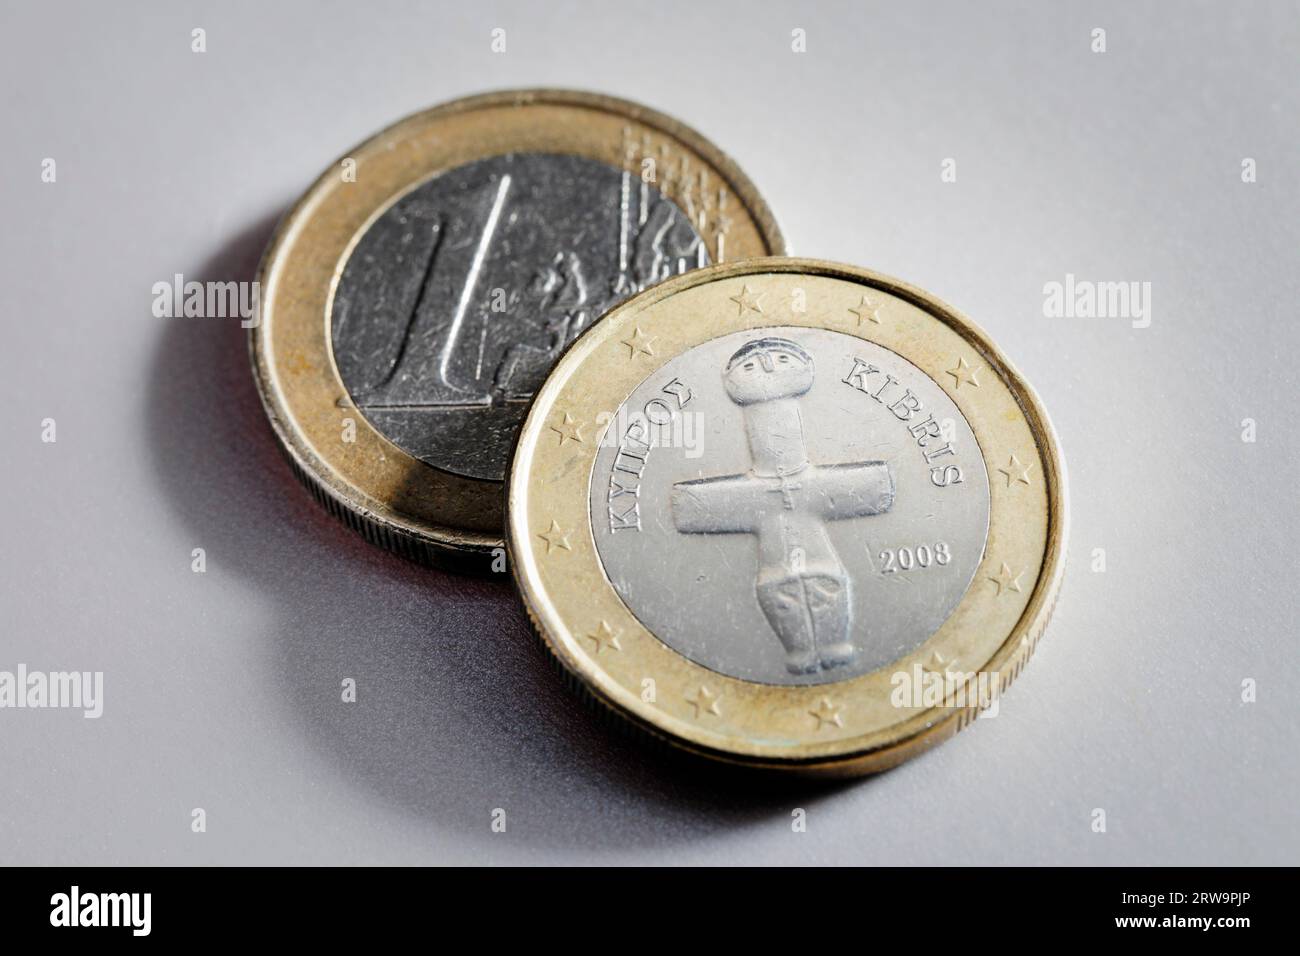 Two 1 Euro coins from Cyprus Stock Photo